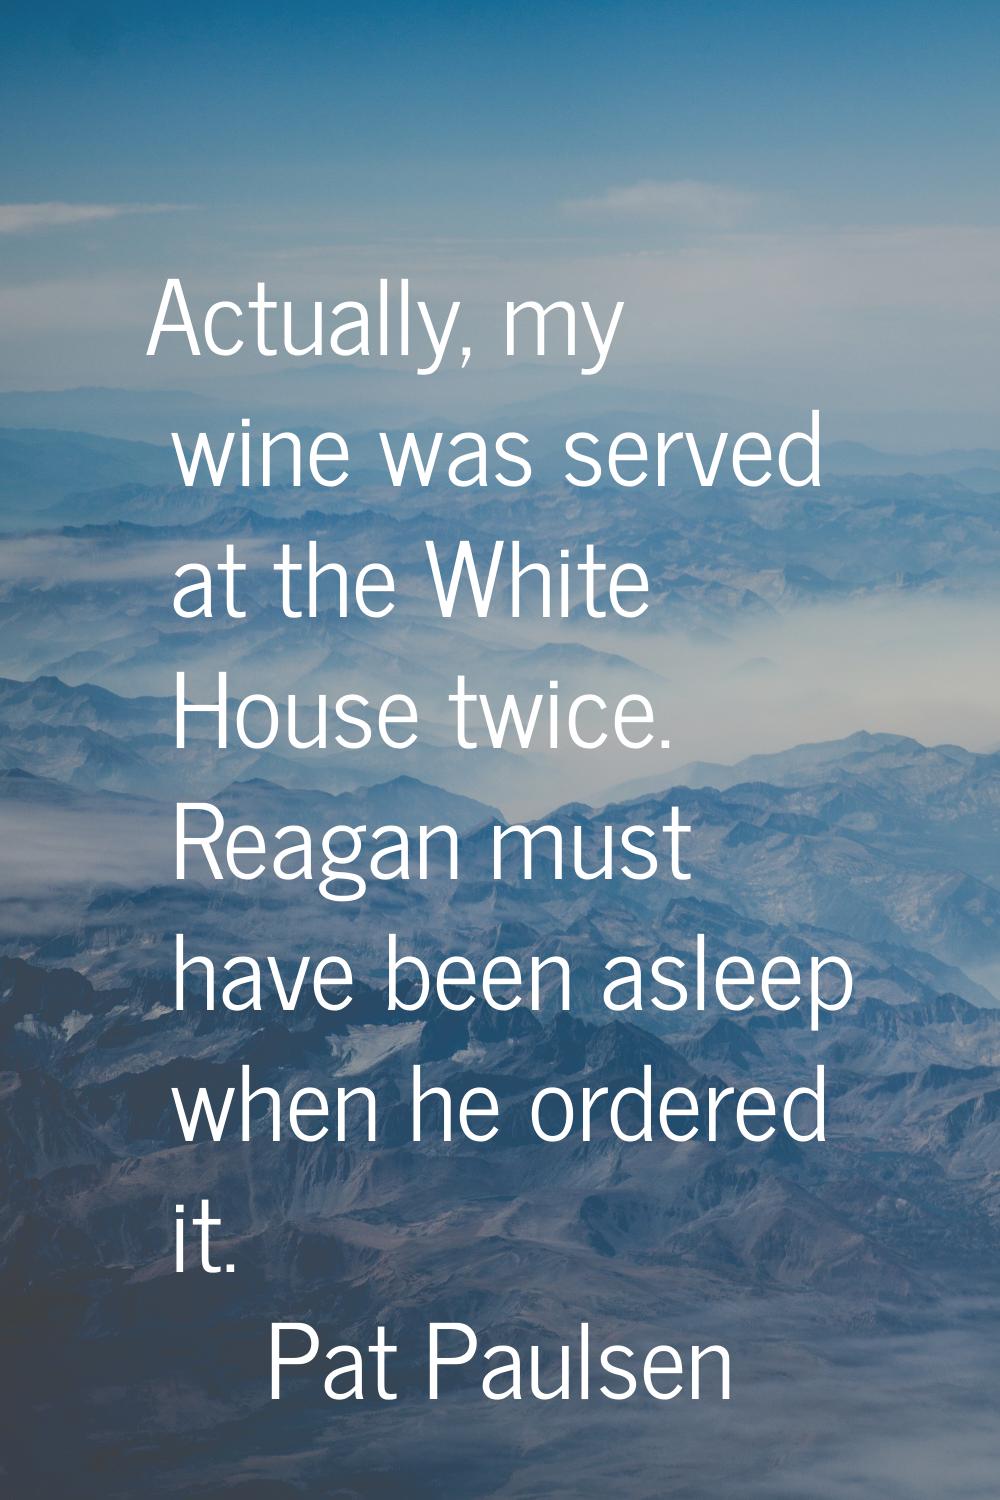 Actually, my wine was served at the White House twice. Reagan must have been asleep when he ordered